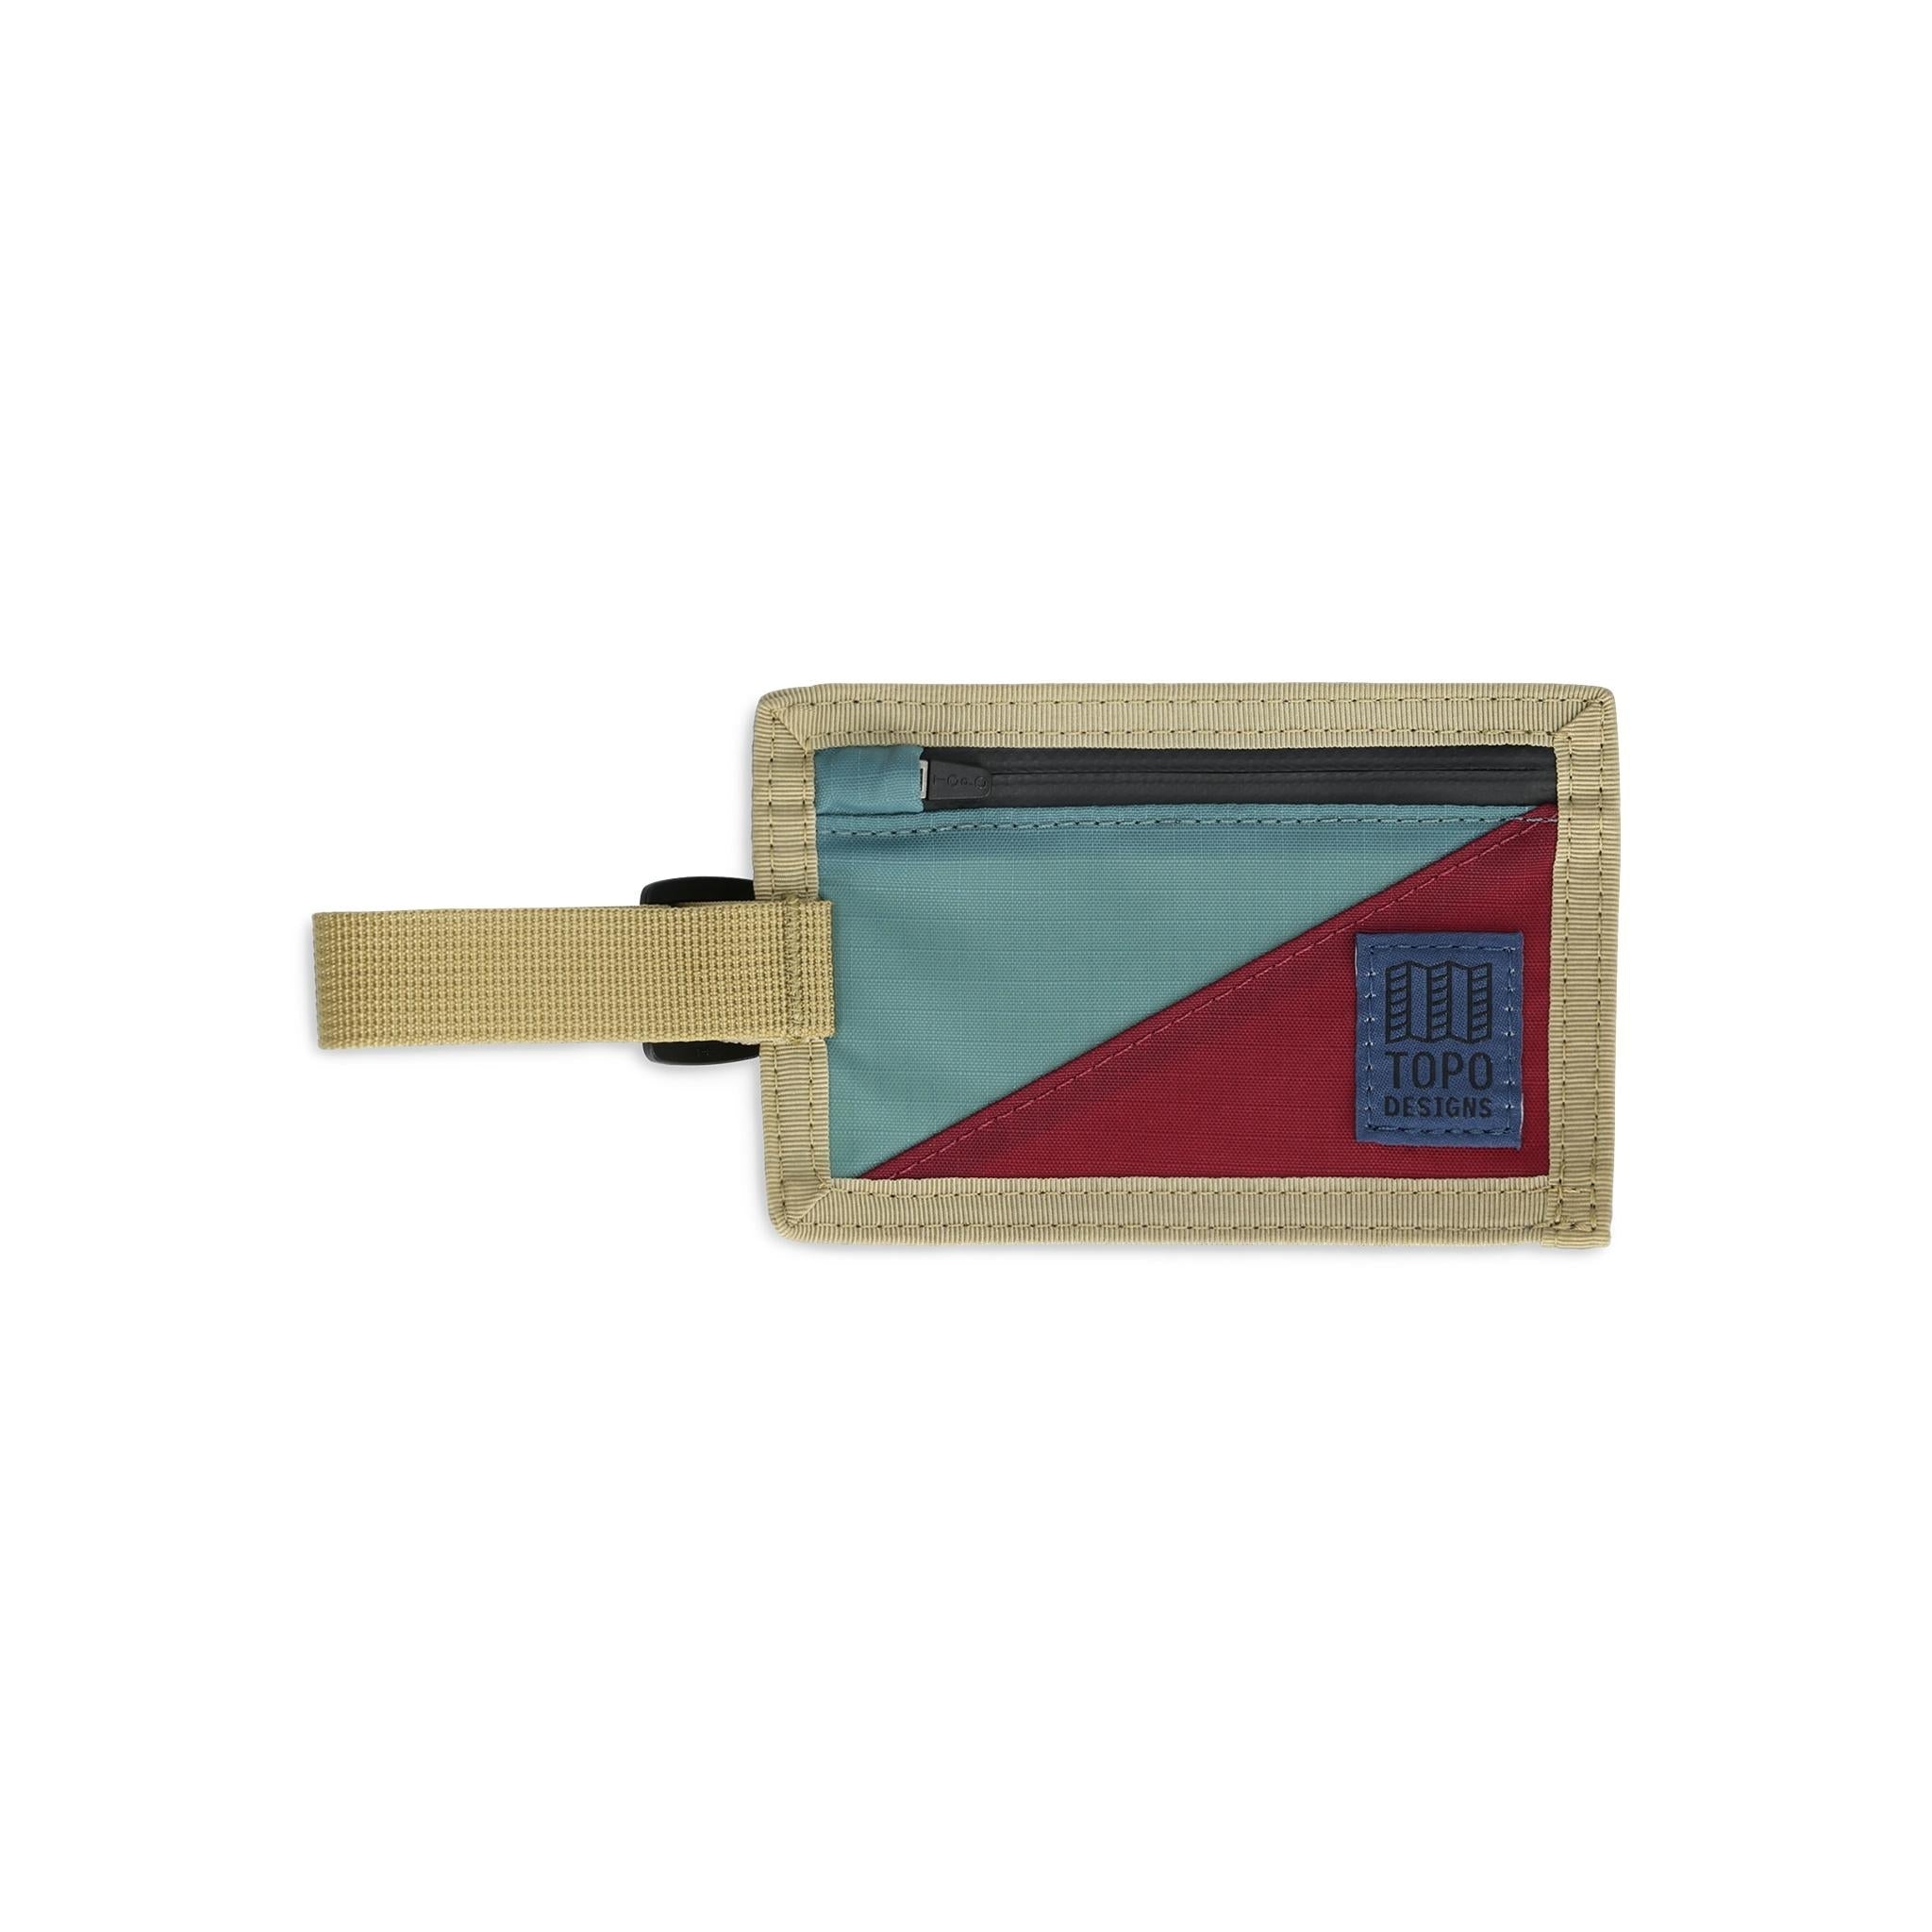 Front View of Topo Designs Luggage Tag in "Sea Pine / Burgundy"